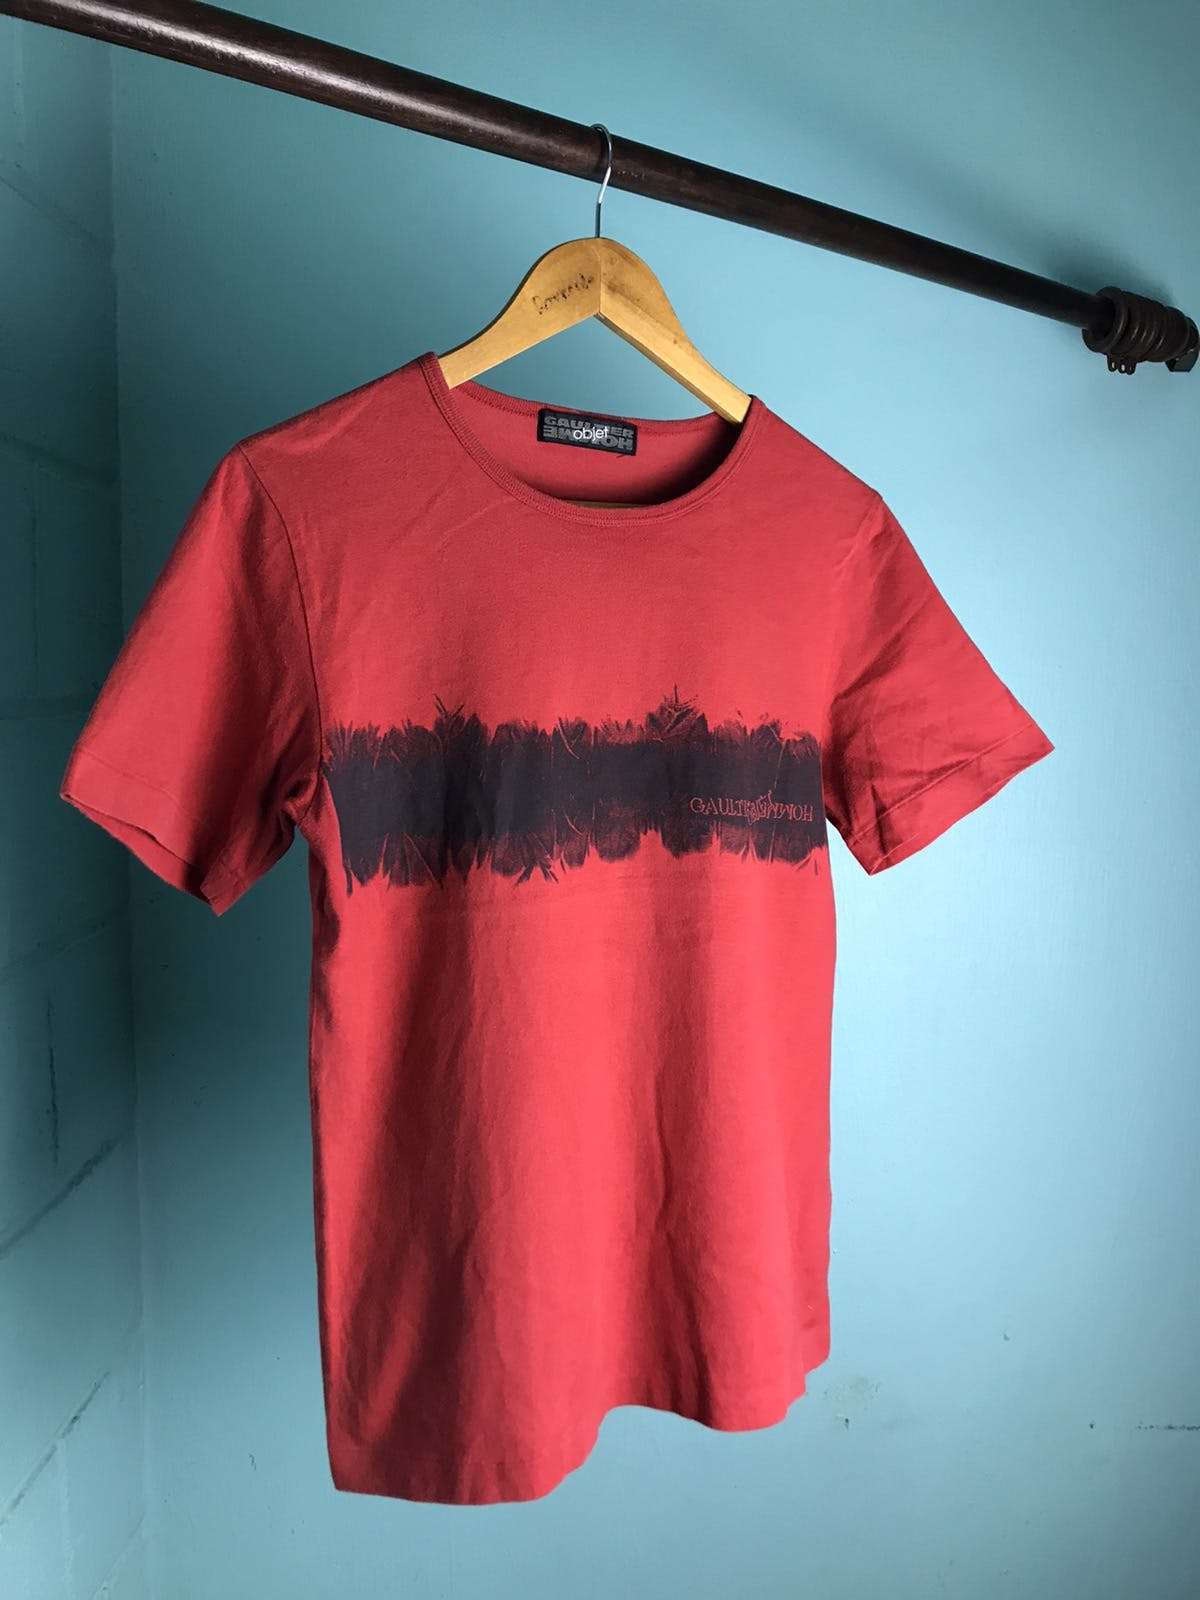 Vintage Gaultier Homme Object tee - 1